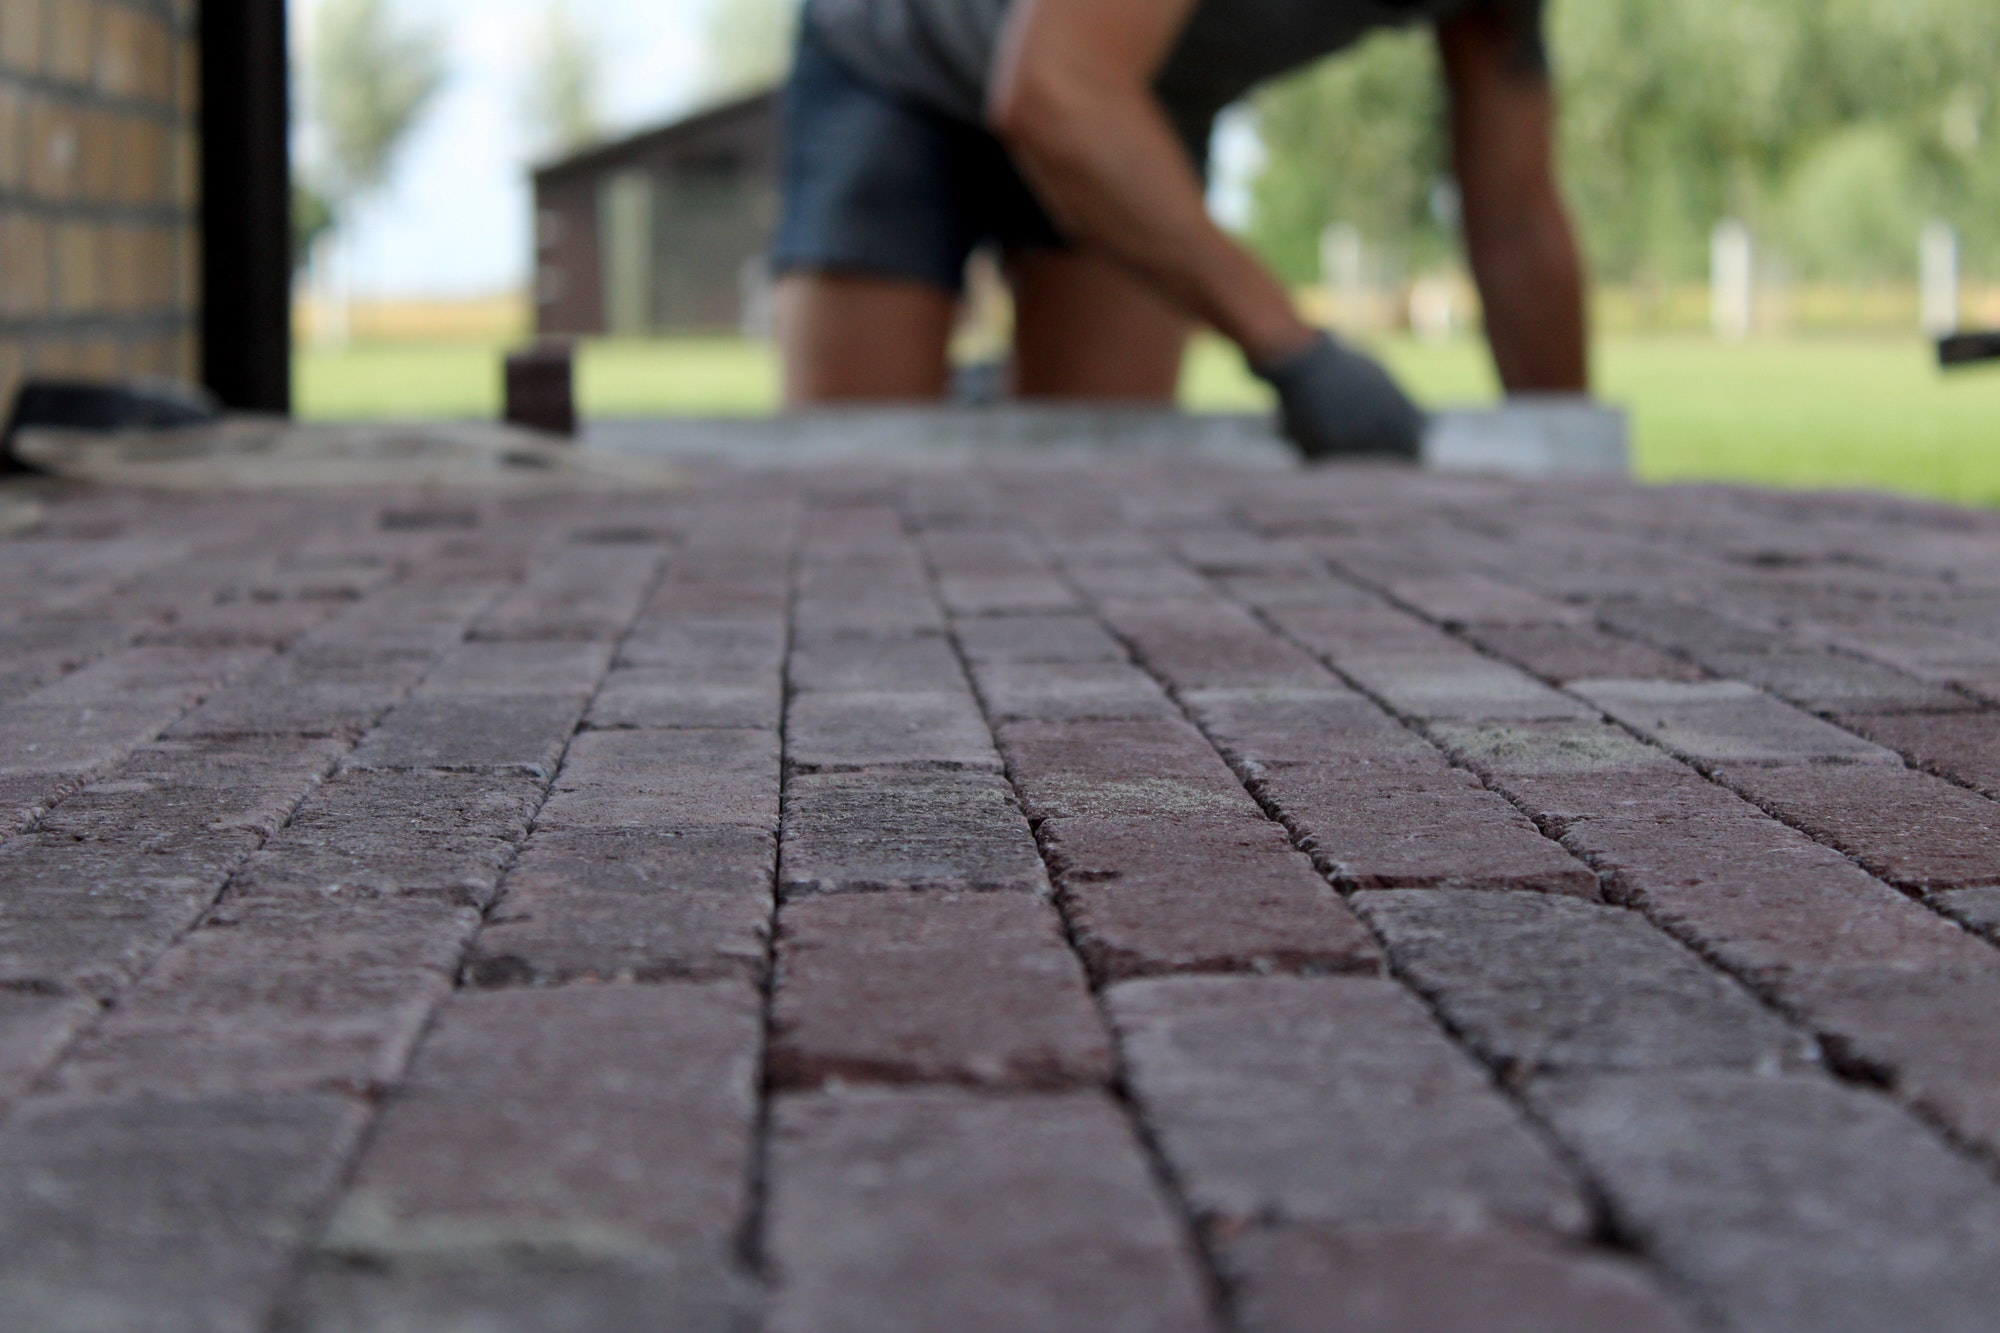 Paving a brick floor in the garden creating a walking path